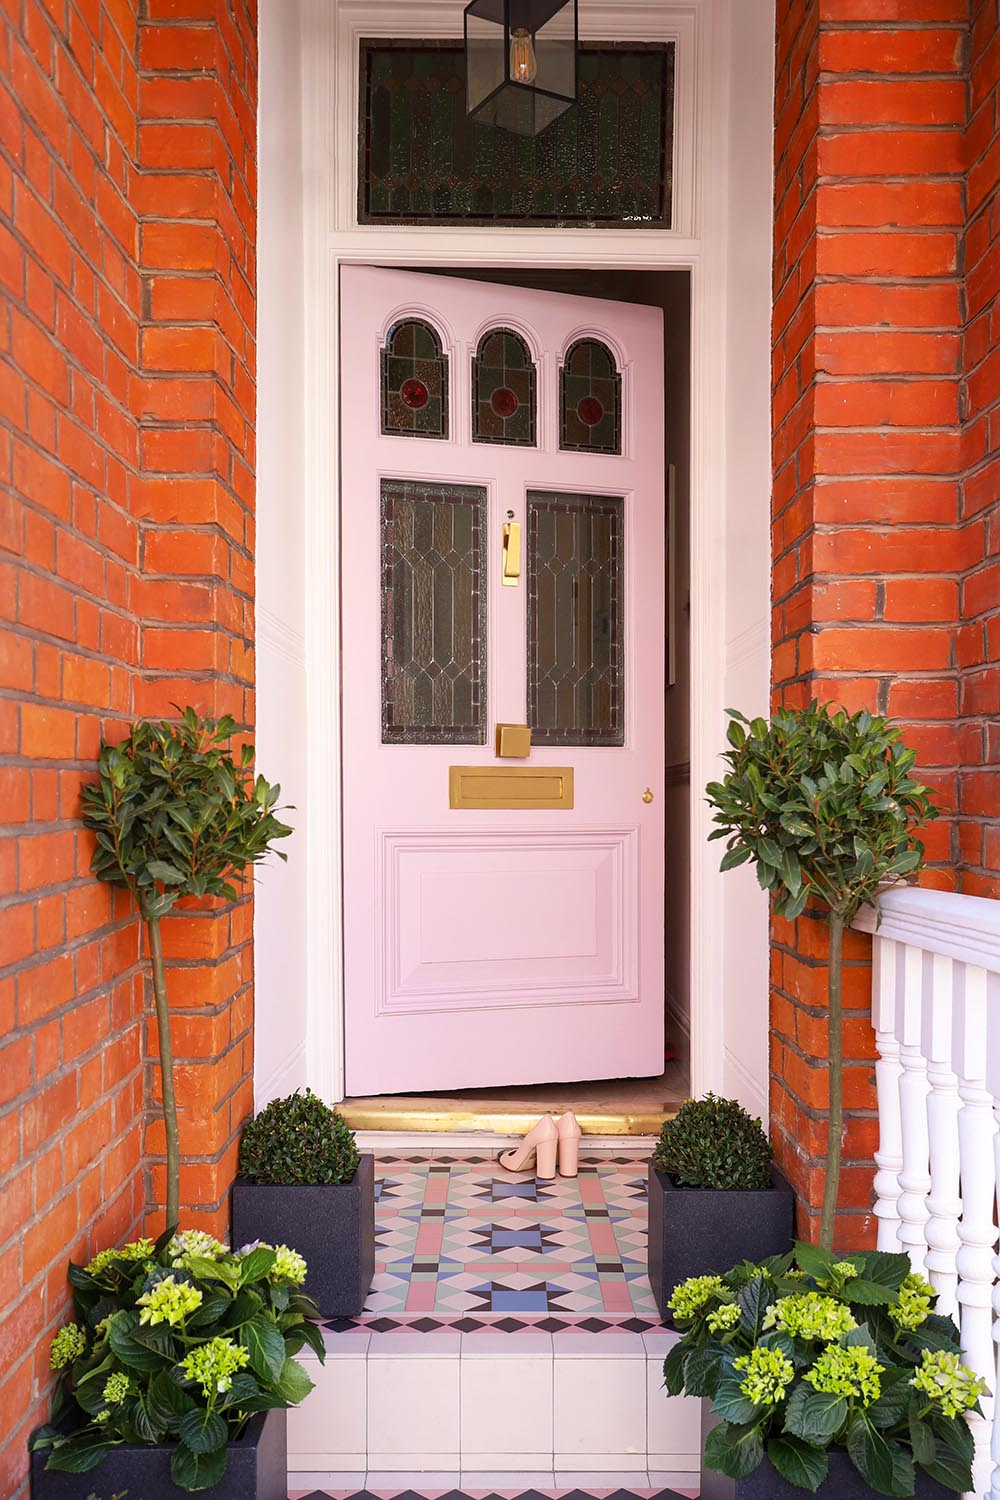 7 ideas to boost your home's curb appeal | Livingetc